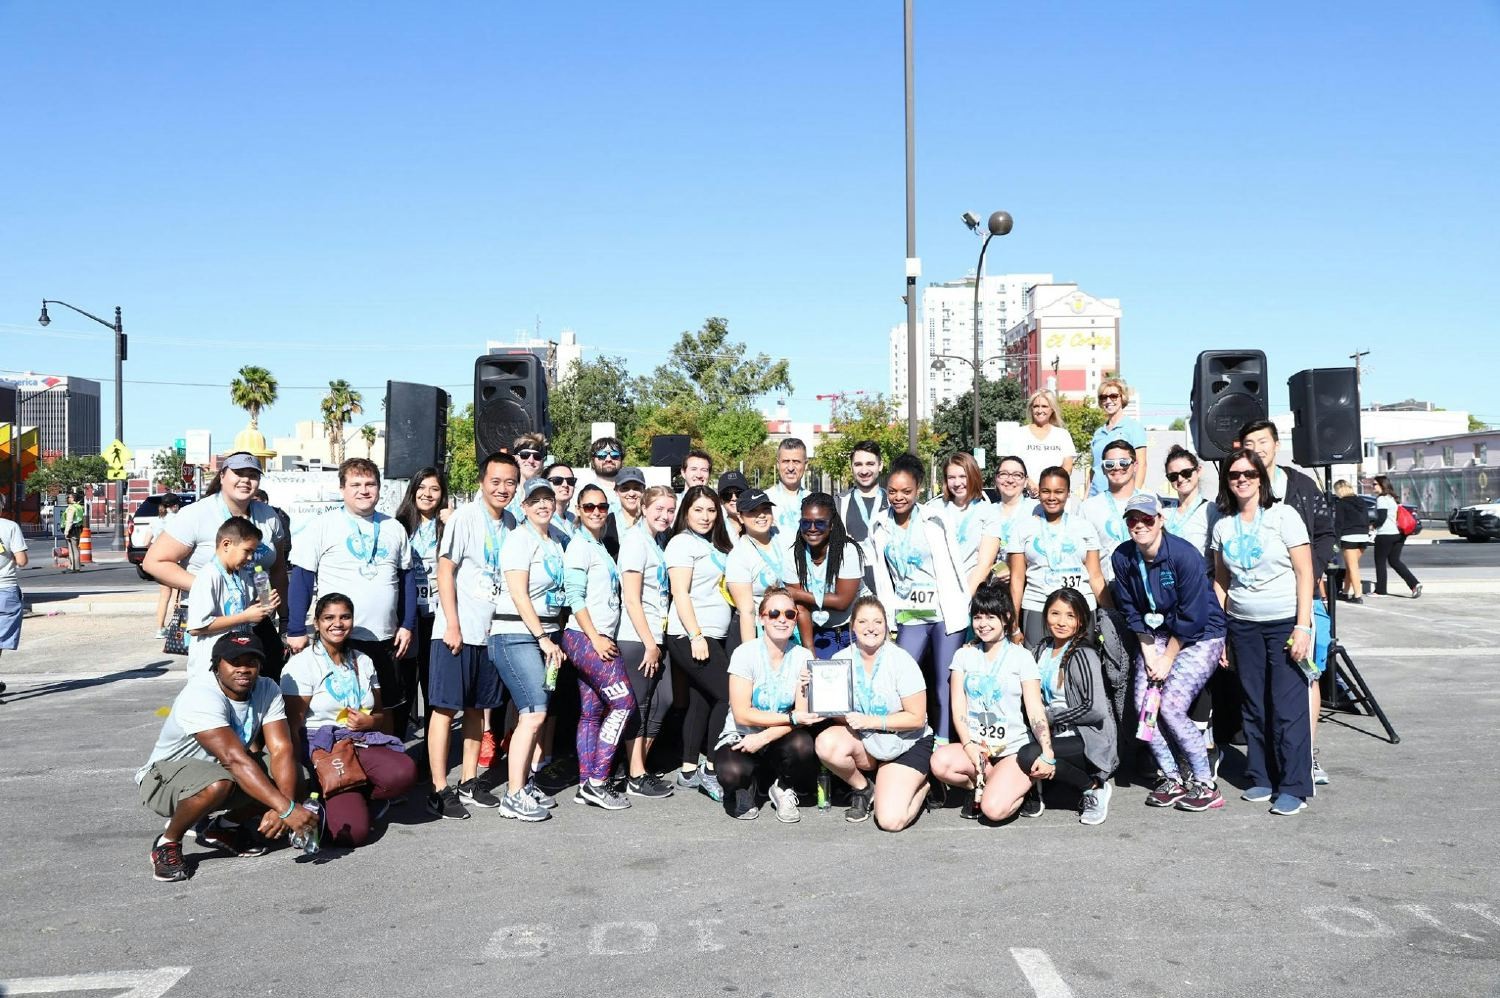 Anderson employees participating in the annual Vegas Strong 5k run.